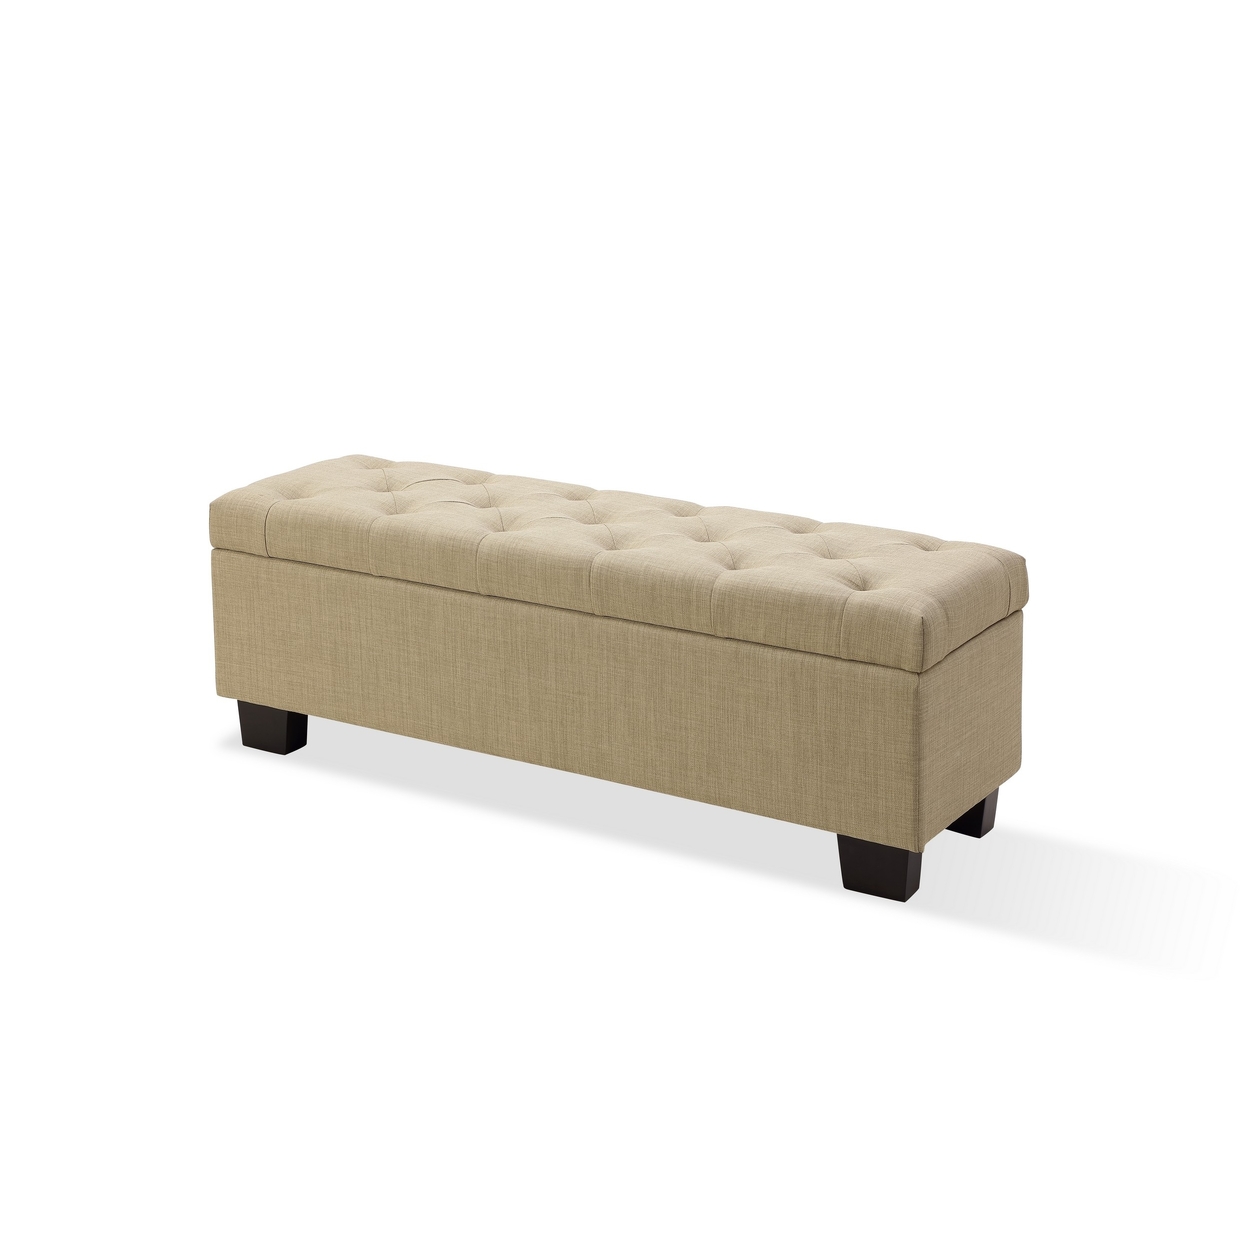 Pax 54 Inch Storage Bench, Polyester Linen, Lifting Top, Tufted, Brown - Saltoro Sherpi